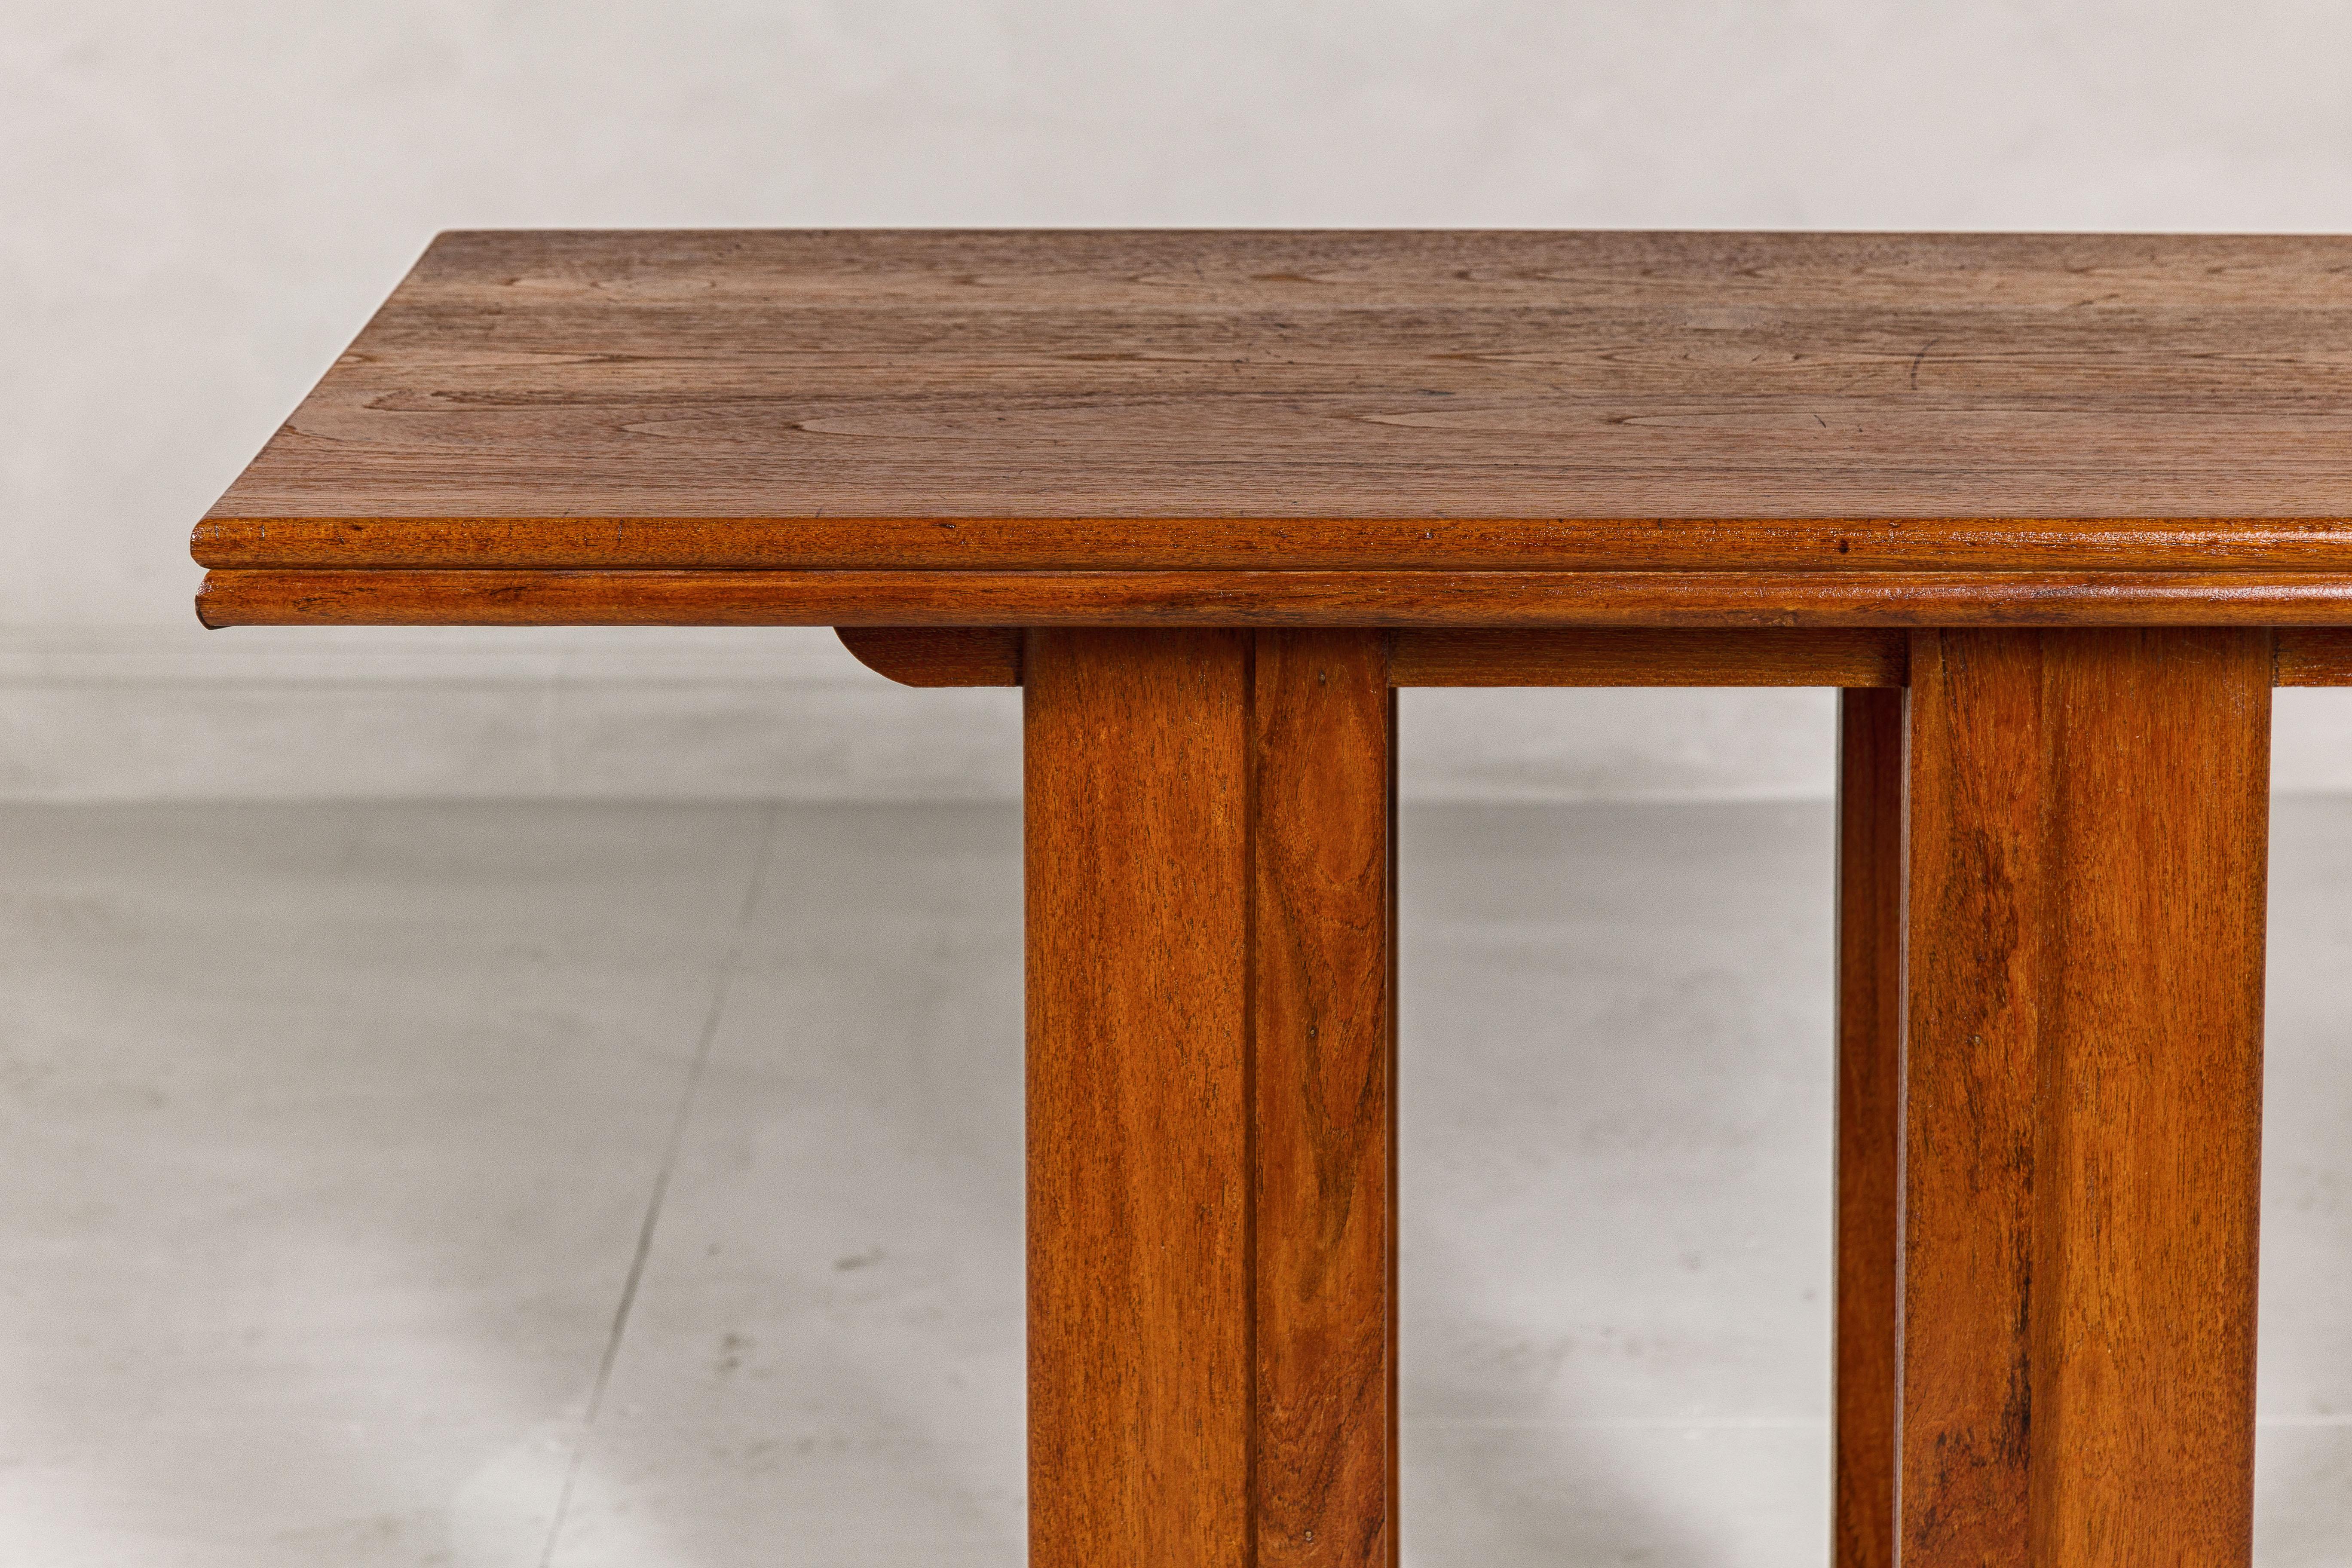 Indonesian Midcentury Wooden Console Table with Art Deco Inspired Base For Sale